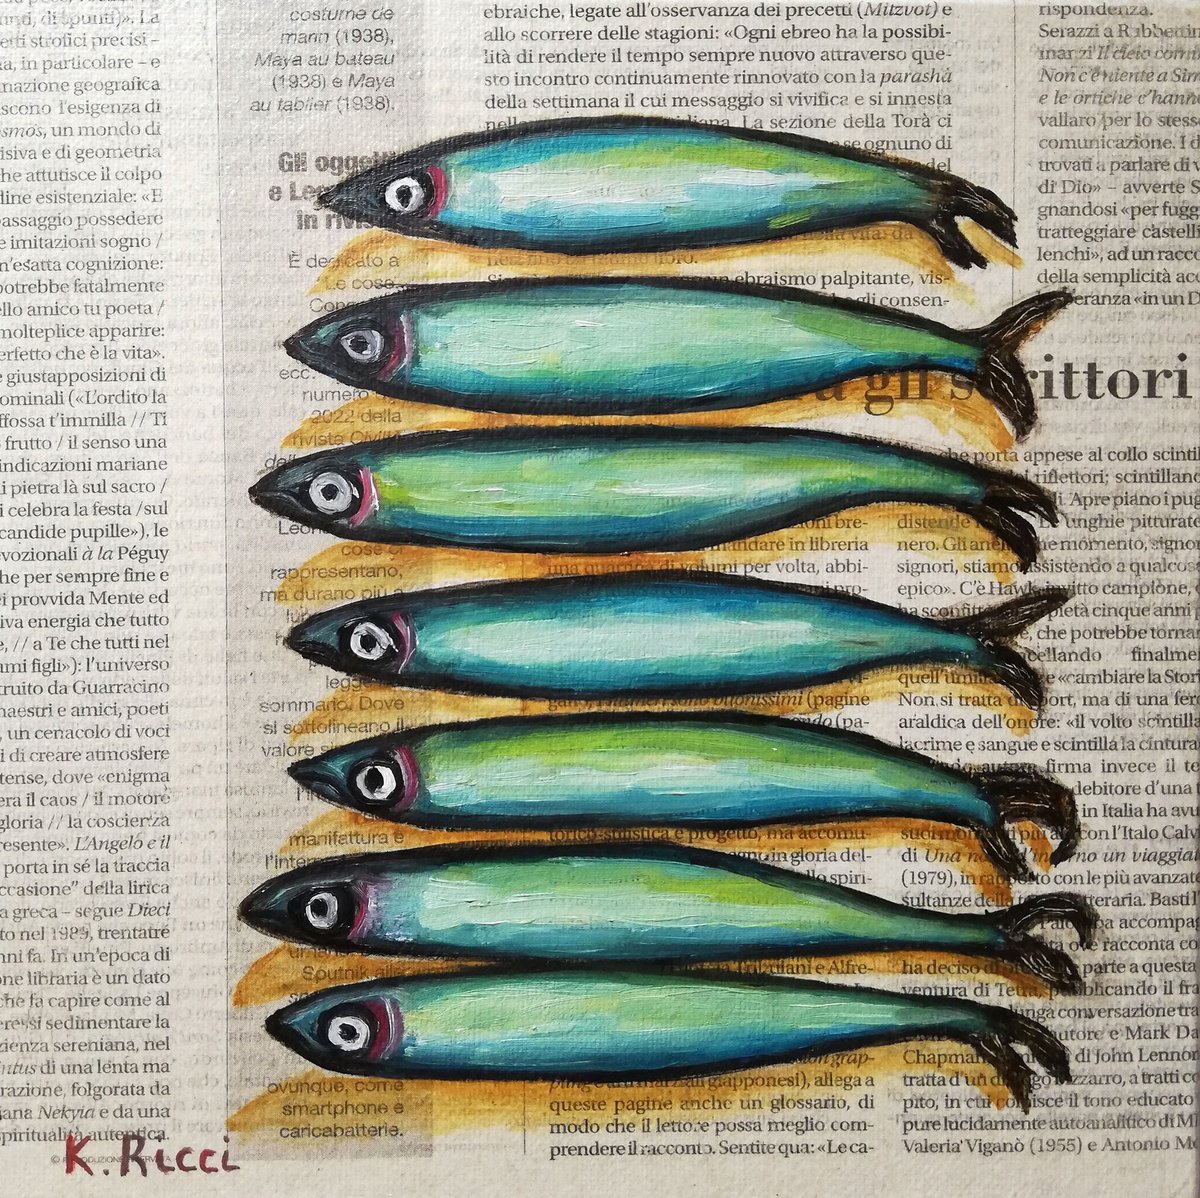 Anchovies on Newspaper Original Oil on Canvas Board Painting 8 by 8 inches (20x20 cm) by Katia Ricci